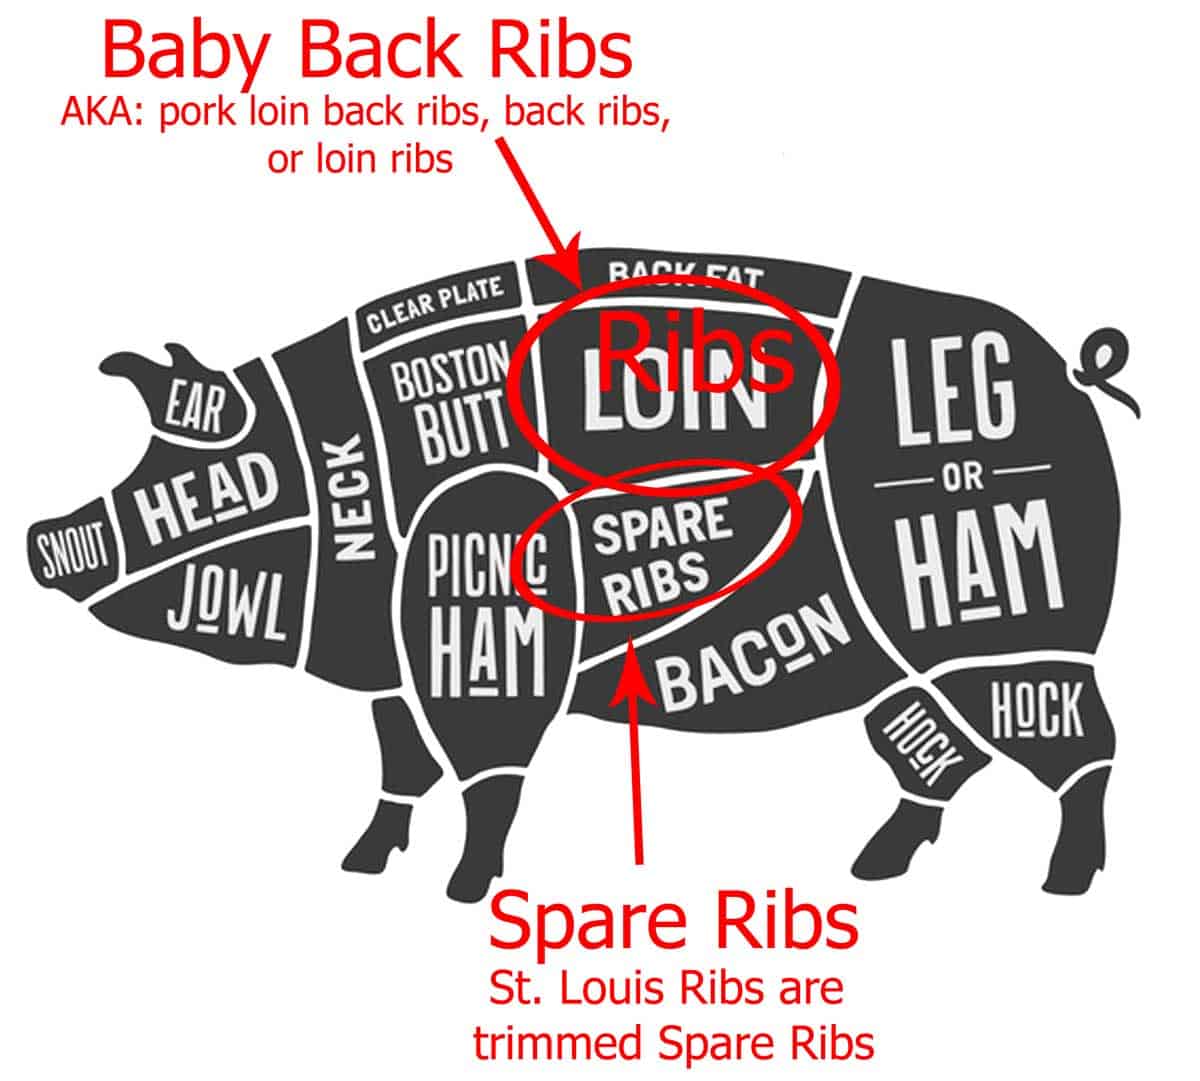 graphic with location of baby back ribs- licensed from Fotolia May 16,2017. Copyright foxysgraphic - Fotolia. Modified per allow by licensed.